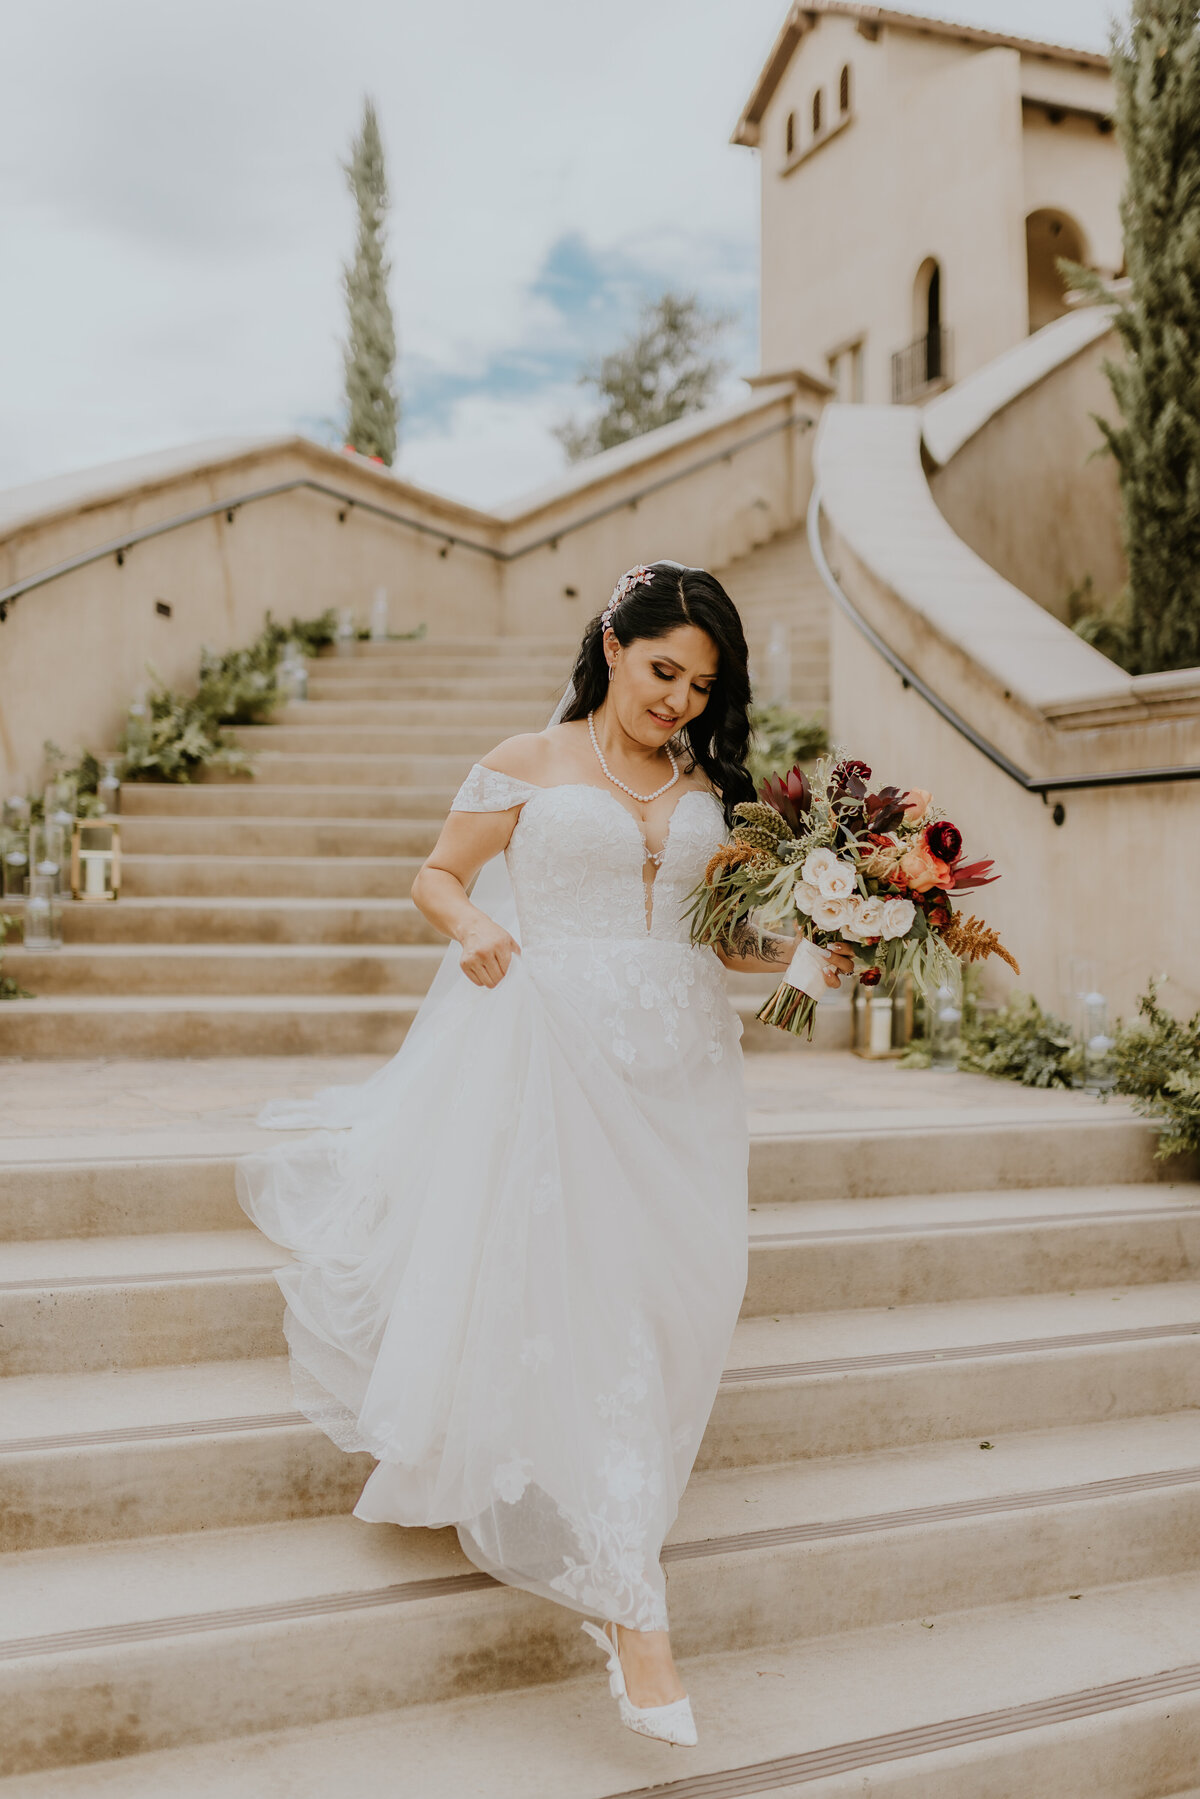 Bride walking down stairs on her wedding day Temecula, California Wedding and lifestyle photographer Yescphotography